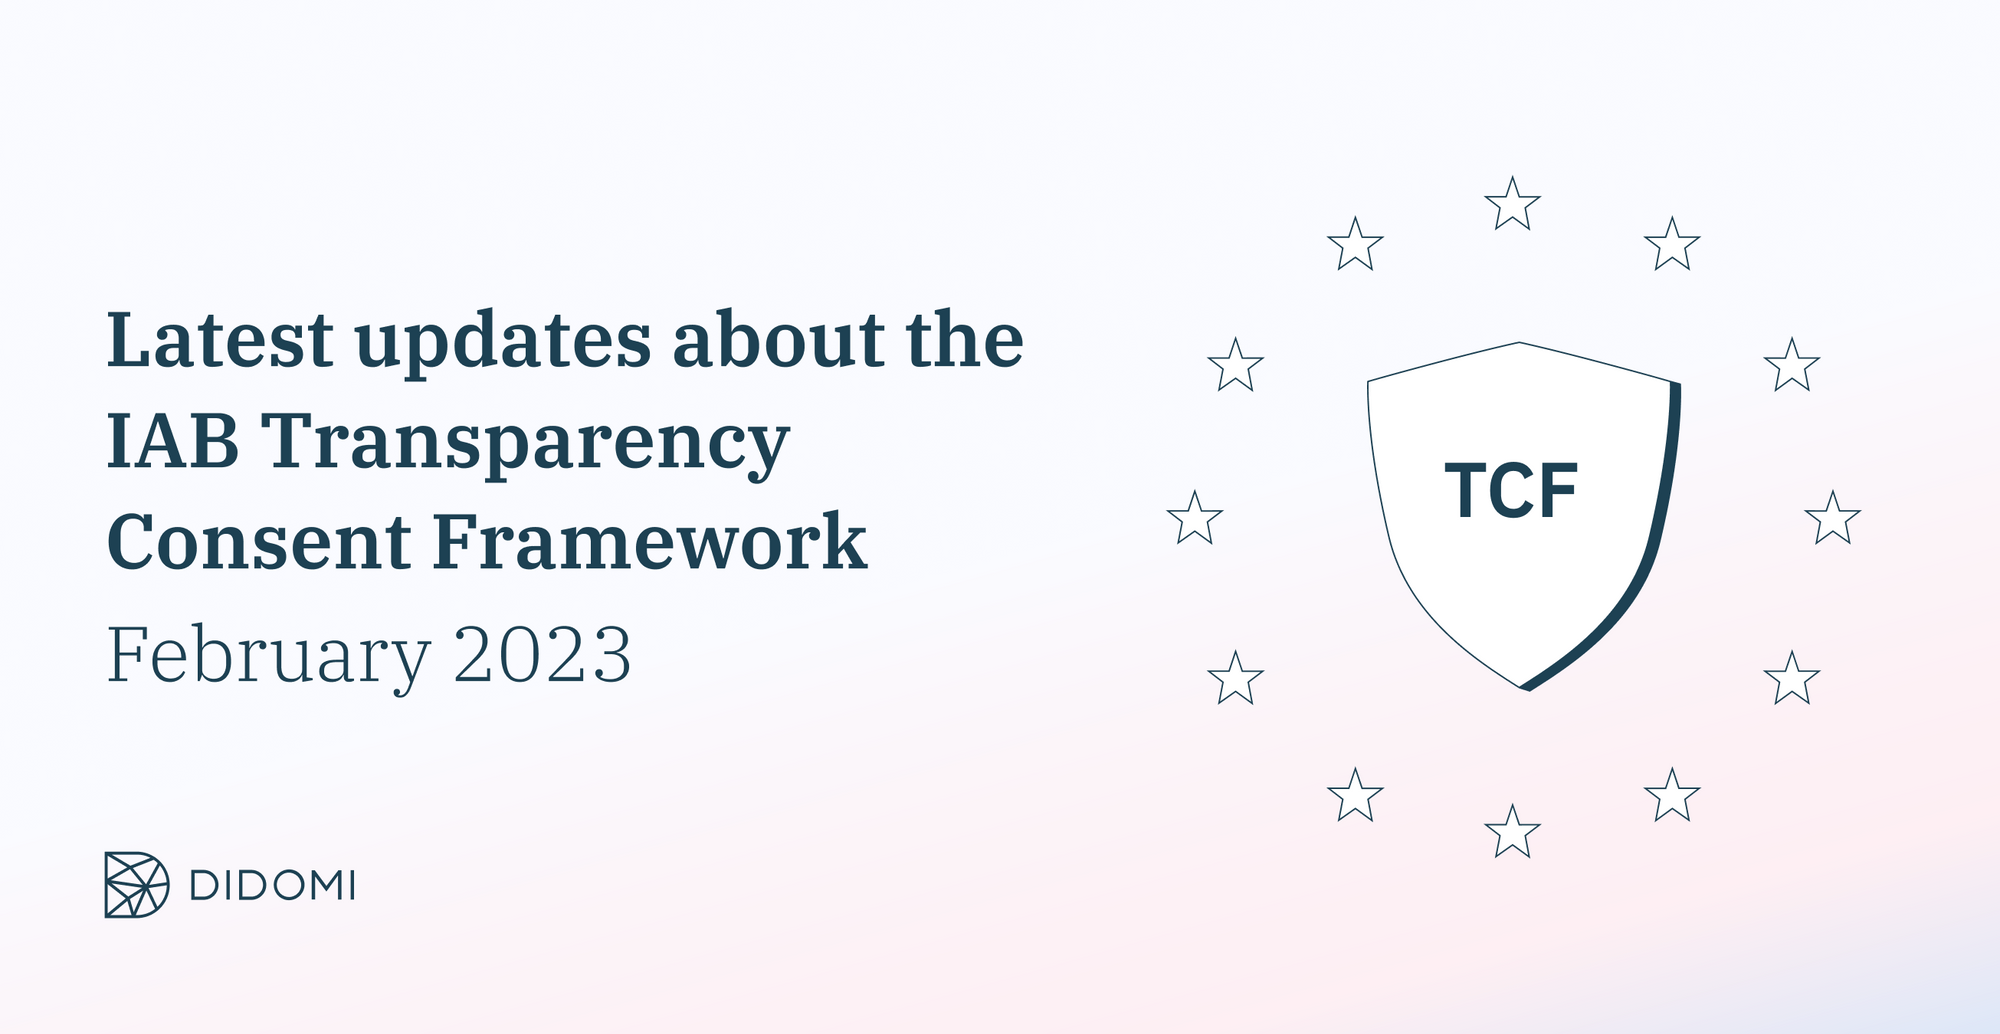 Latest updates about the IAB Transparency & Consent Framework (TCF) - February 2023